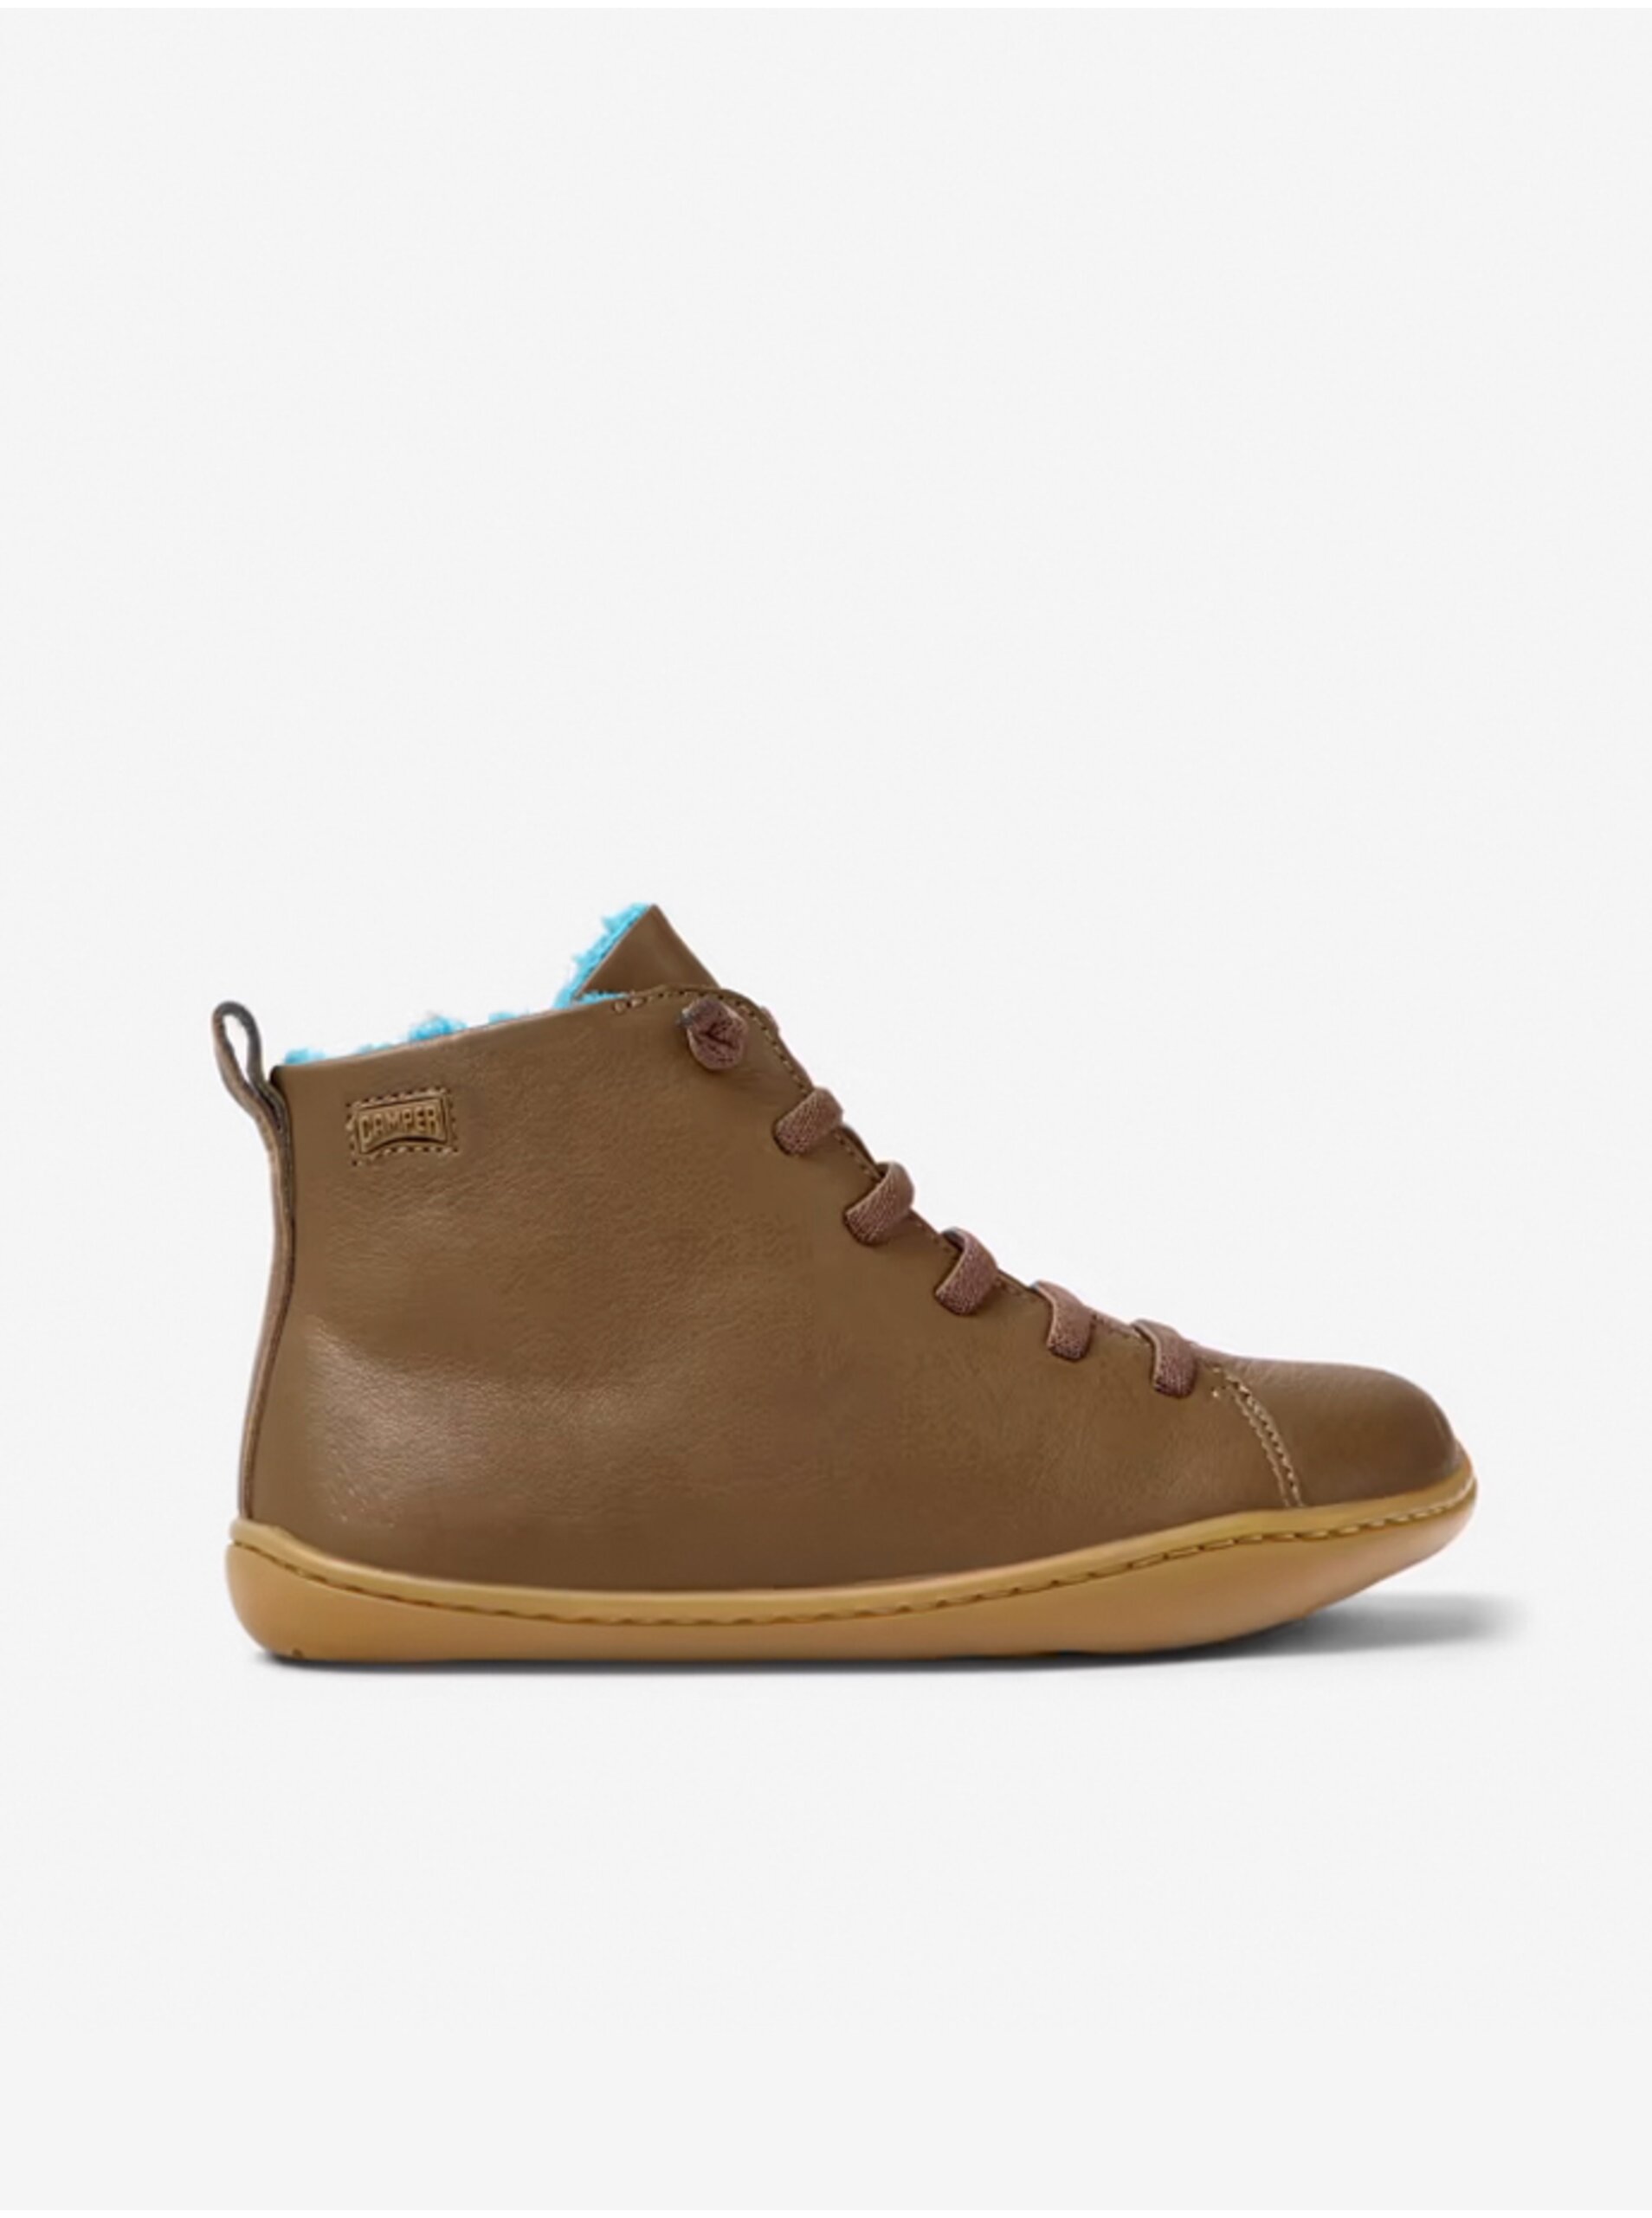 Brown Boys' Leather Winter Barefoot Shoes Camper - Boys